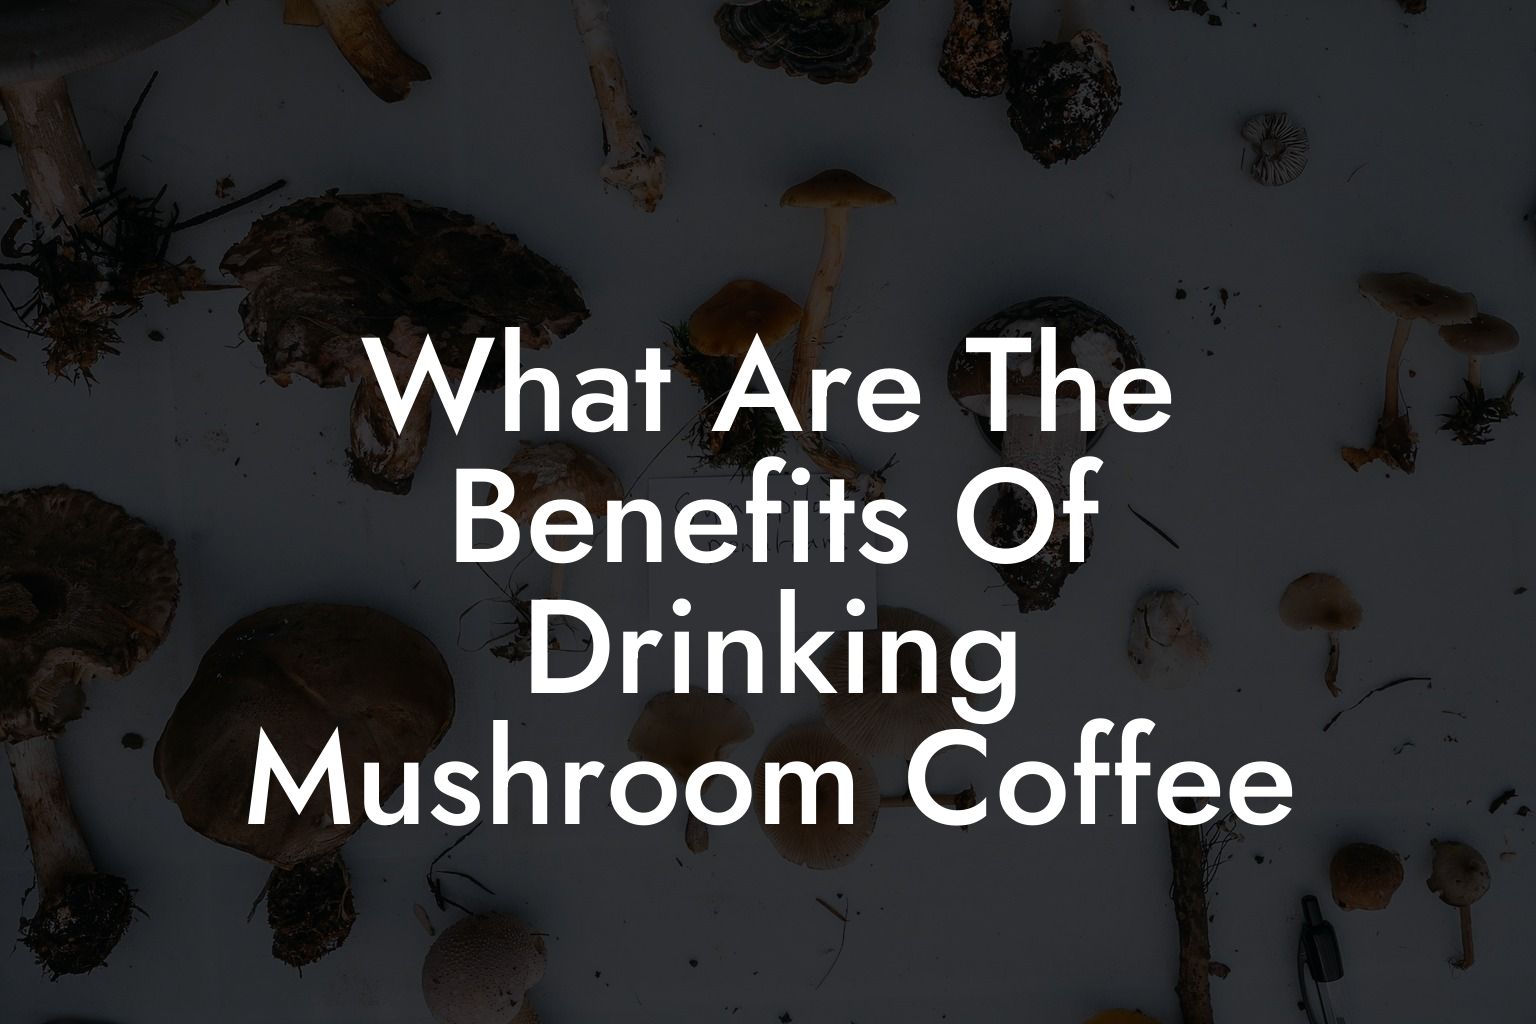 What Are The Benefits Of Drinking Mushroom Coffee